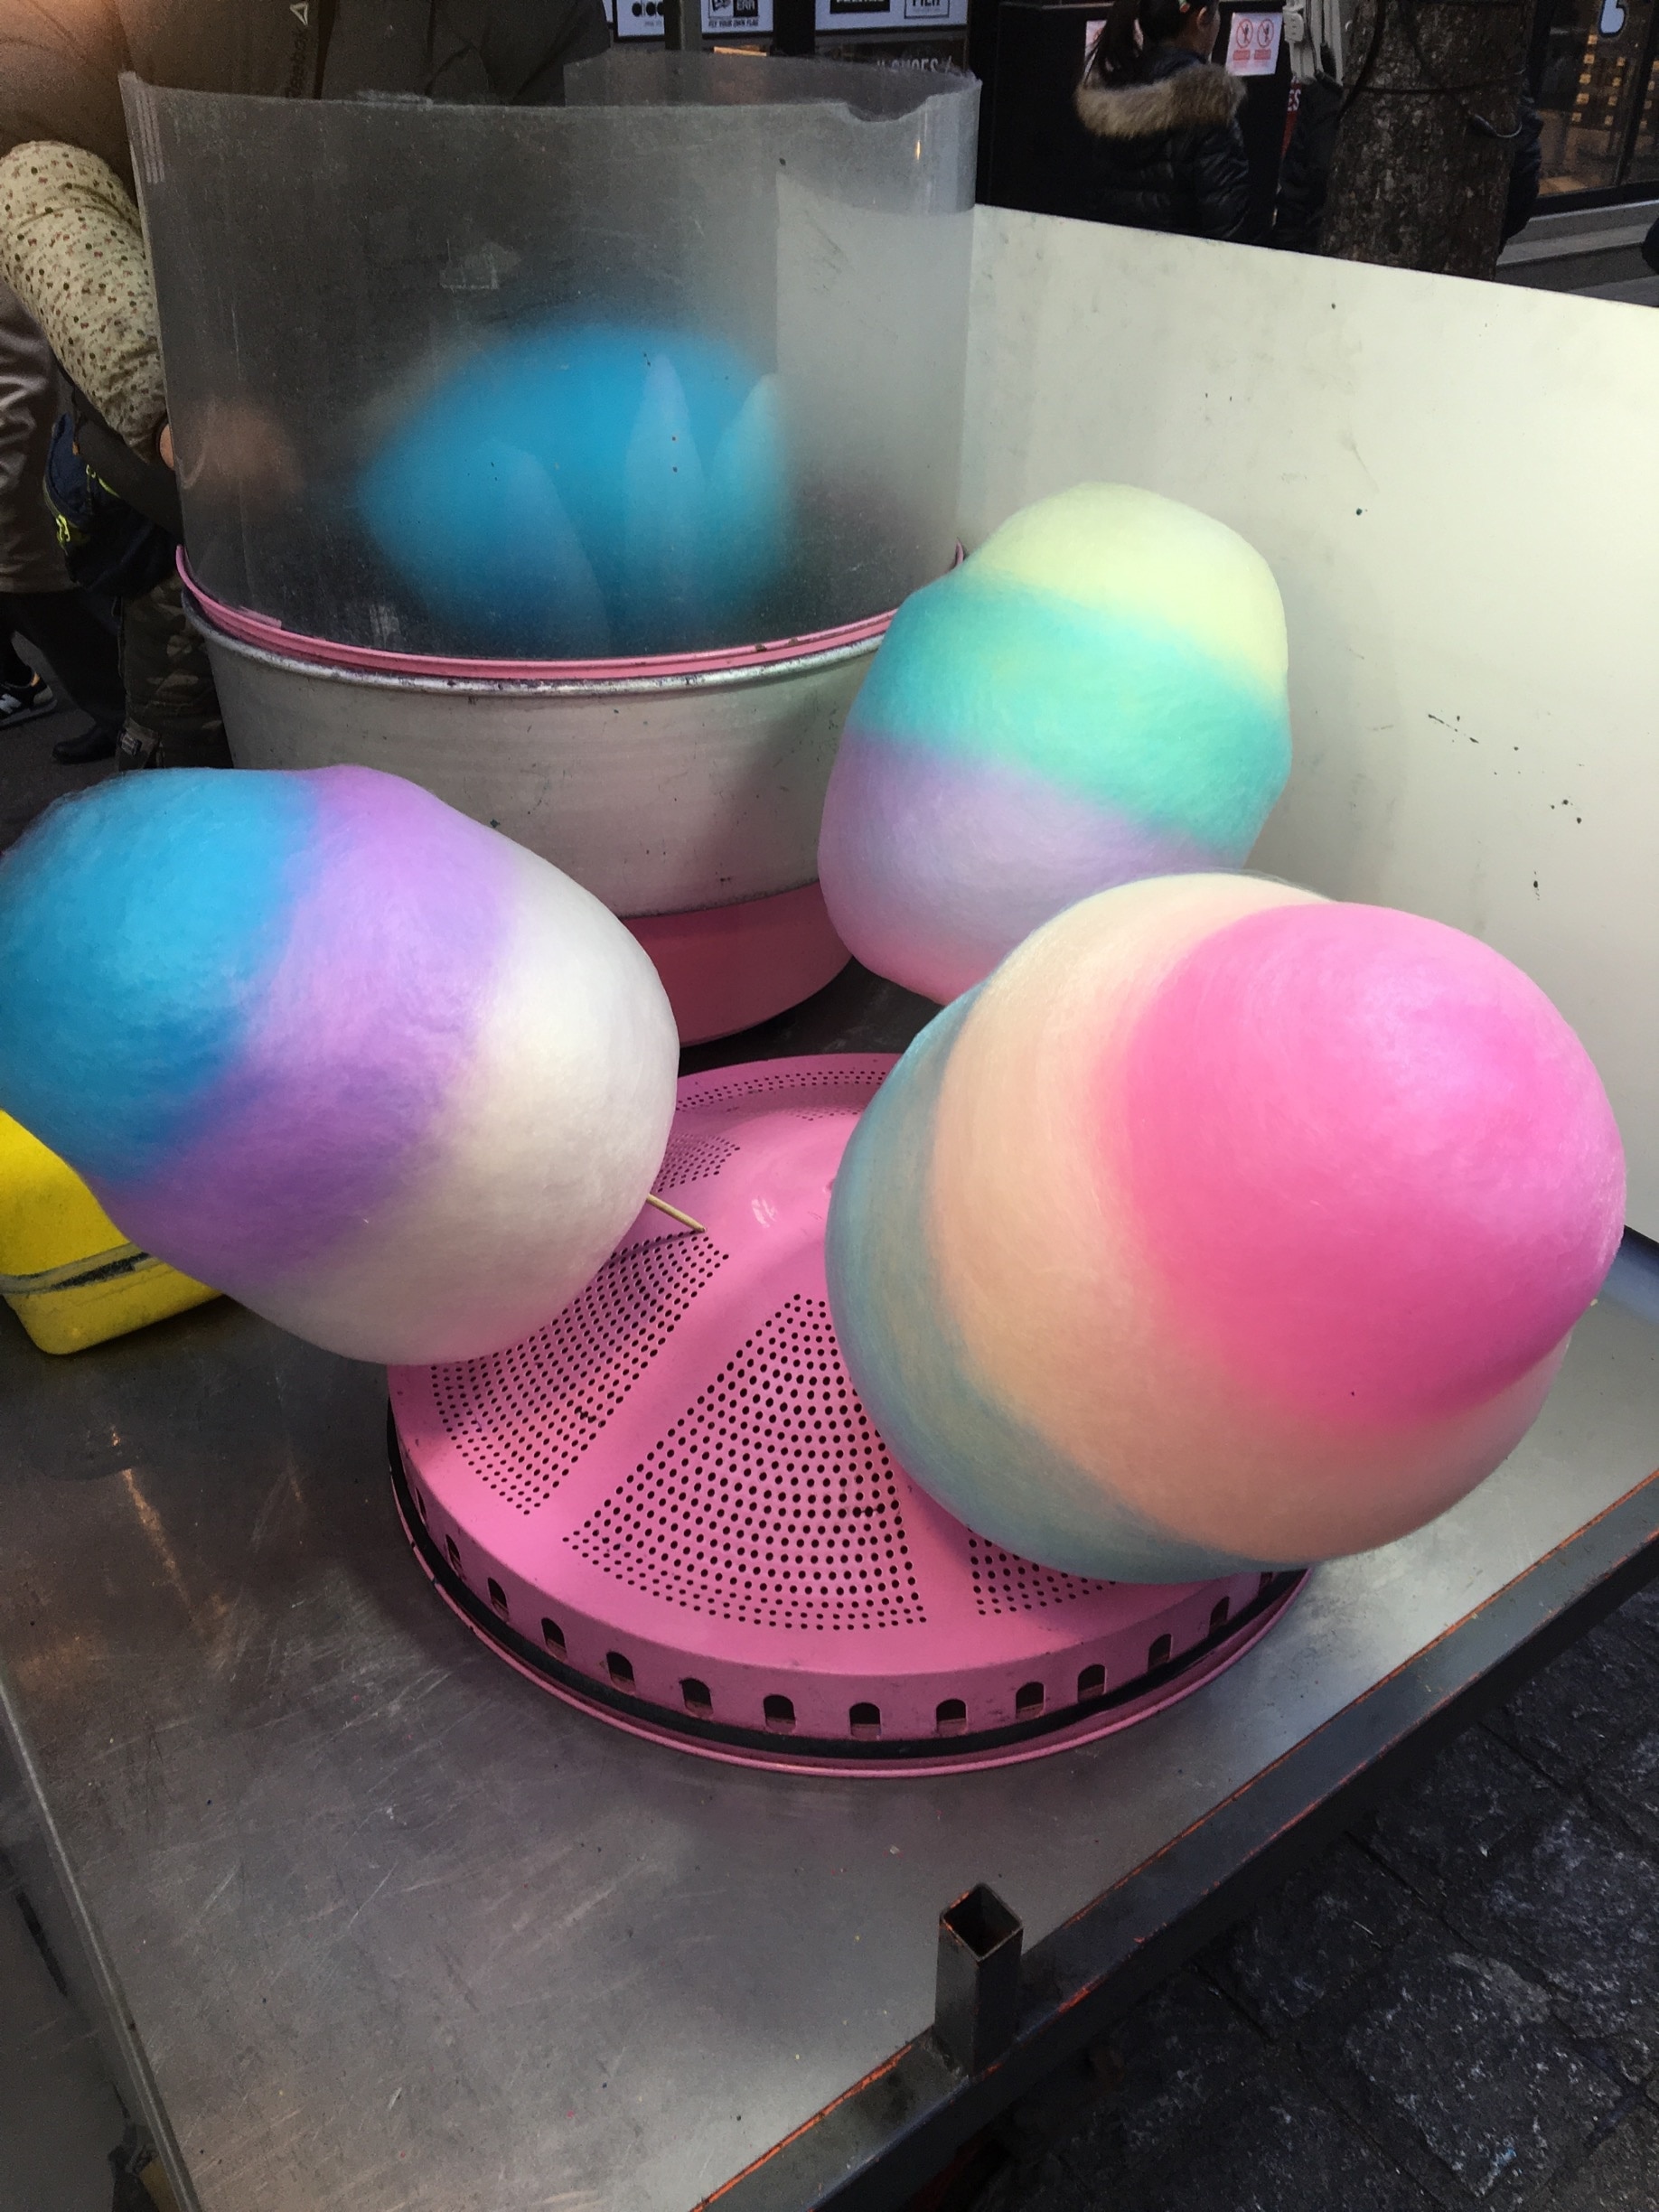 These colorful cotton candy are also shaped into flowers !! Street side carts.